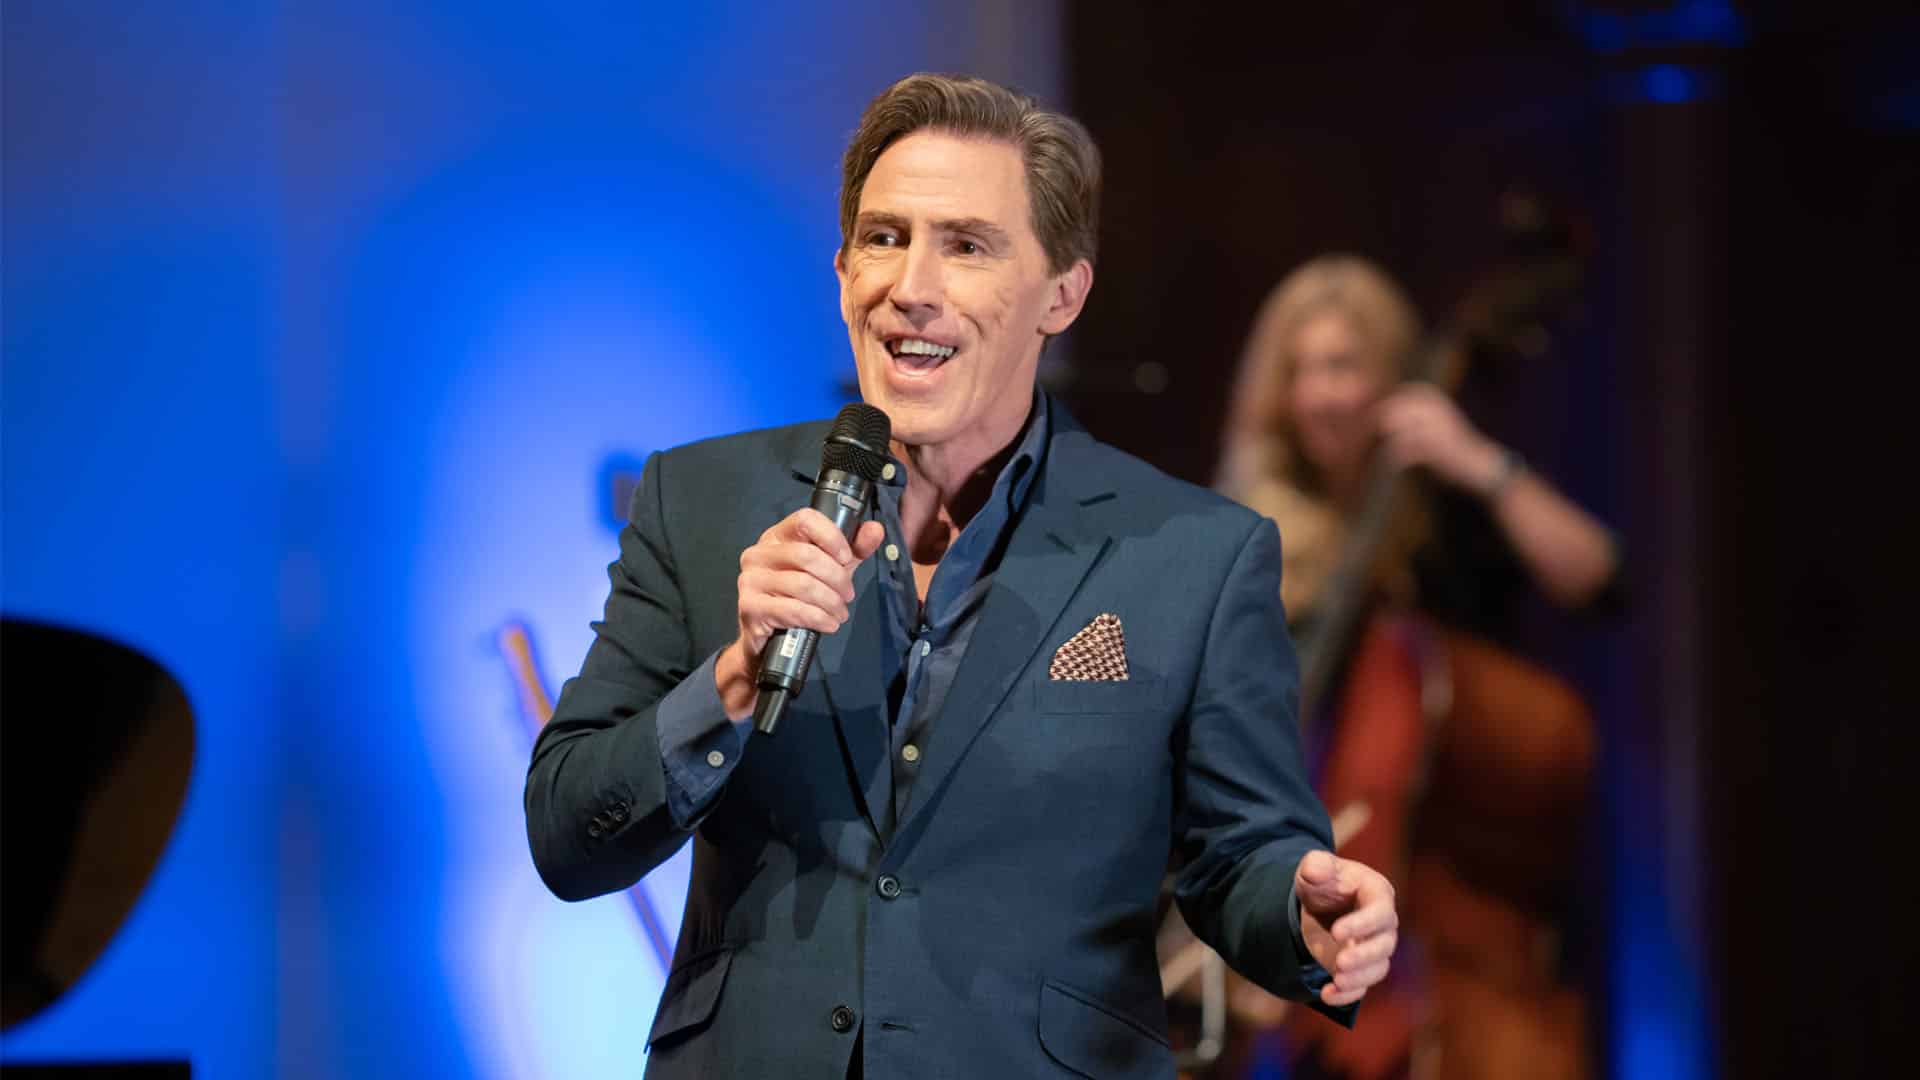 Production image of Rob Brydon on stage - smiling wide, microphone in hand